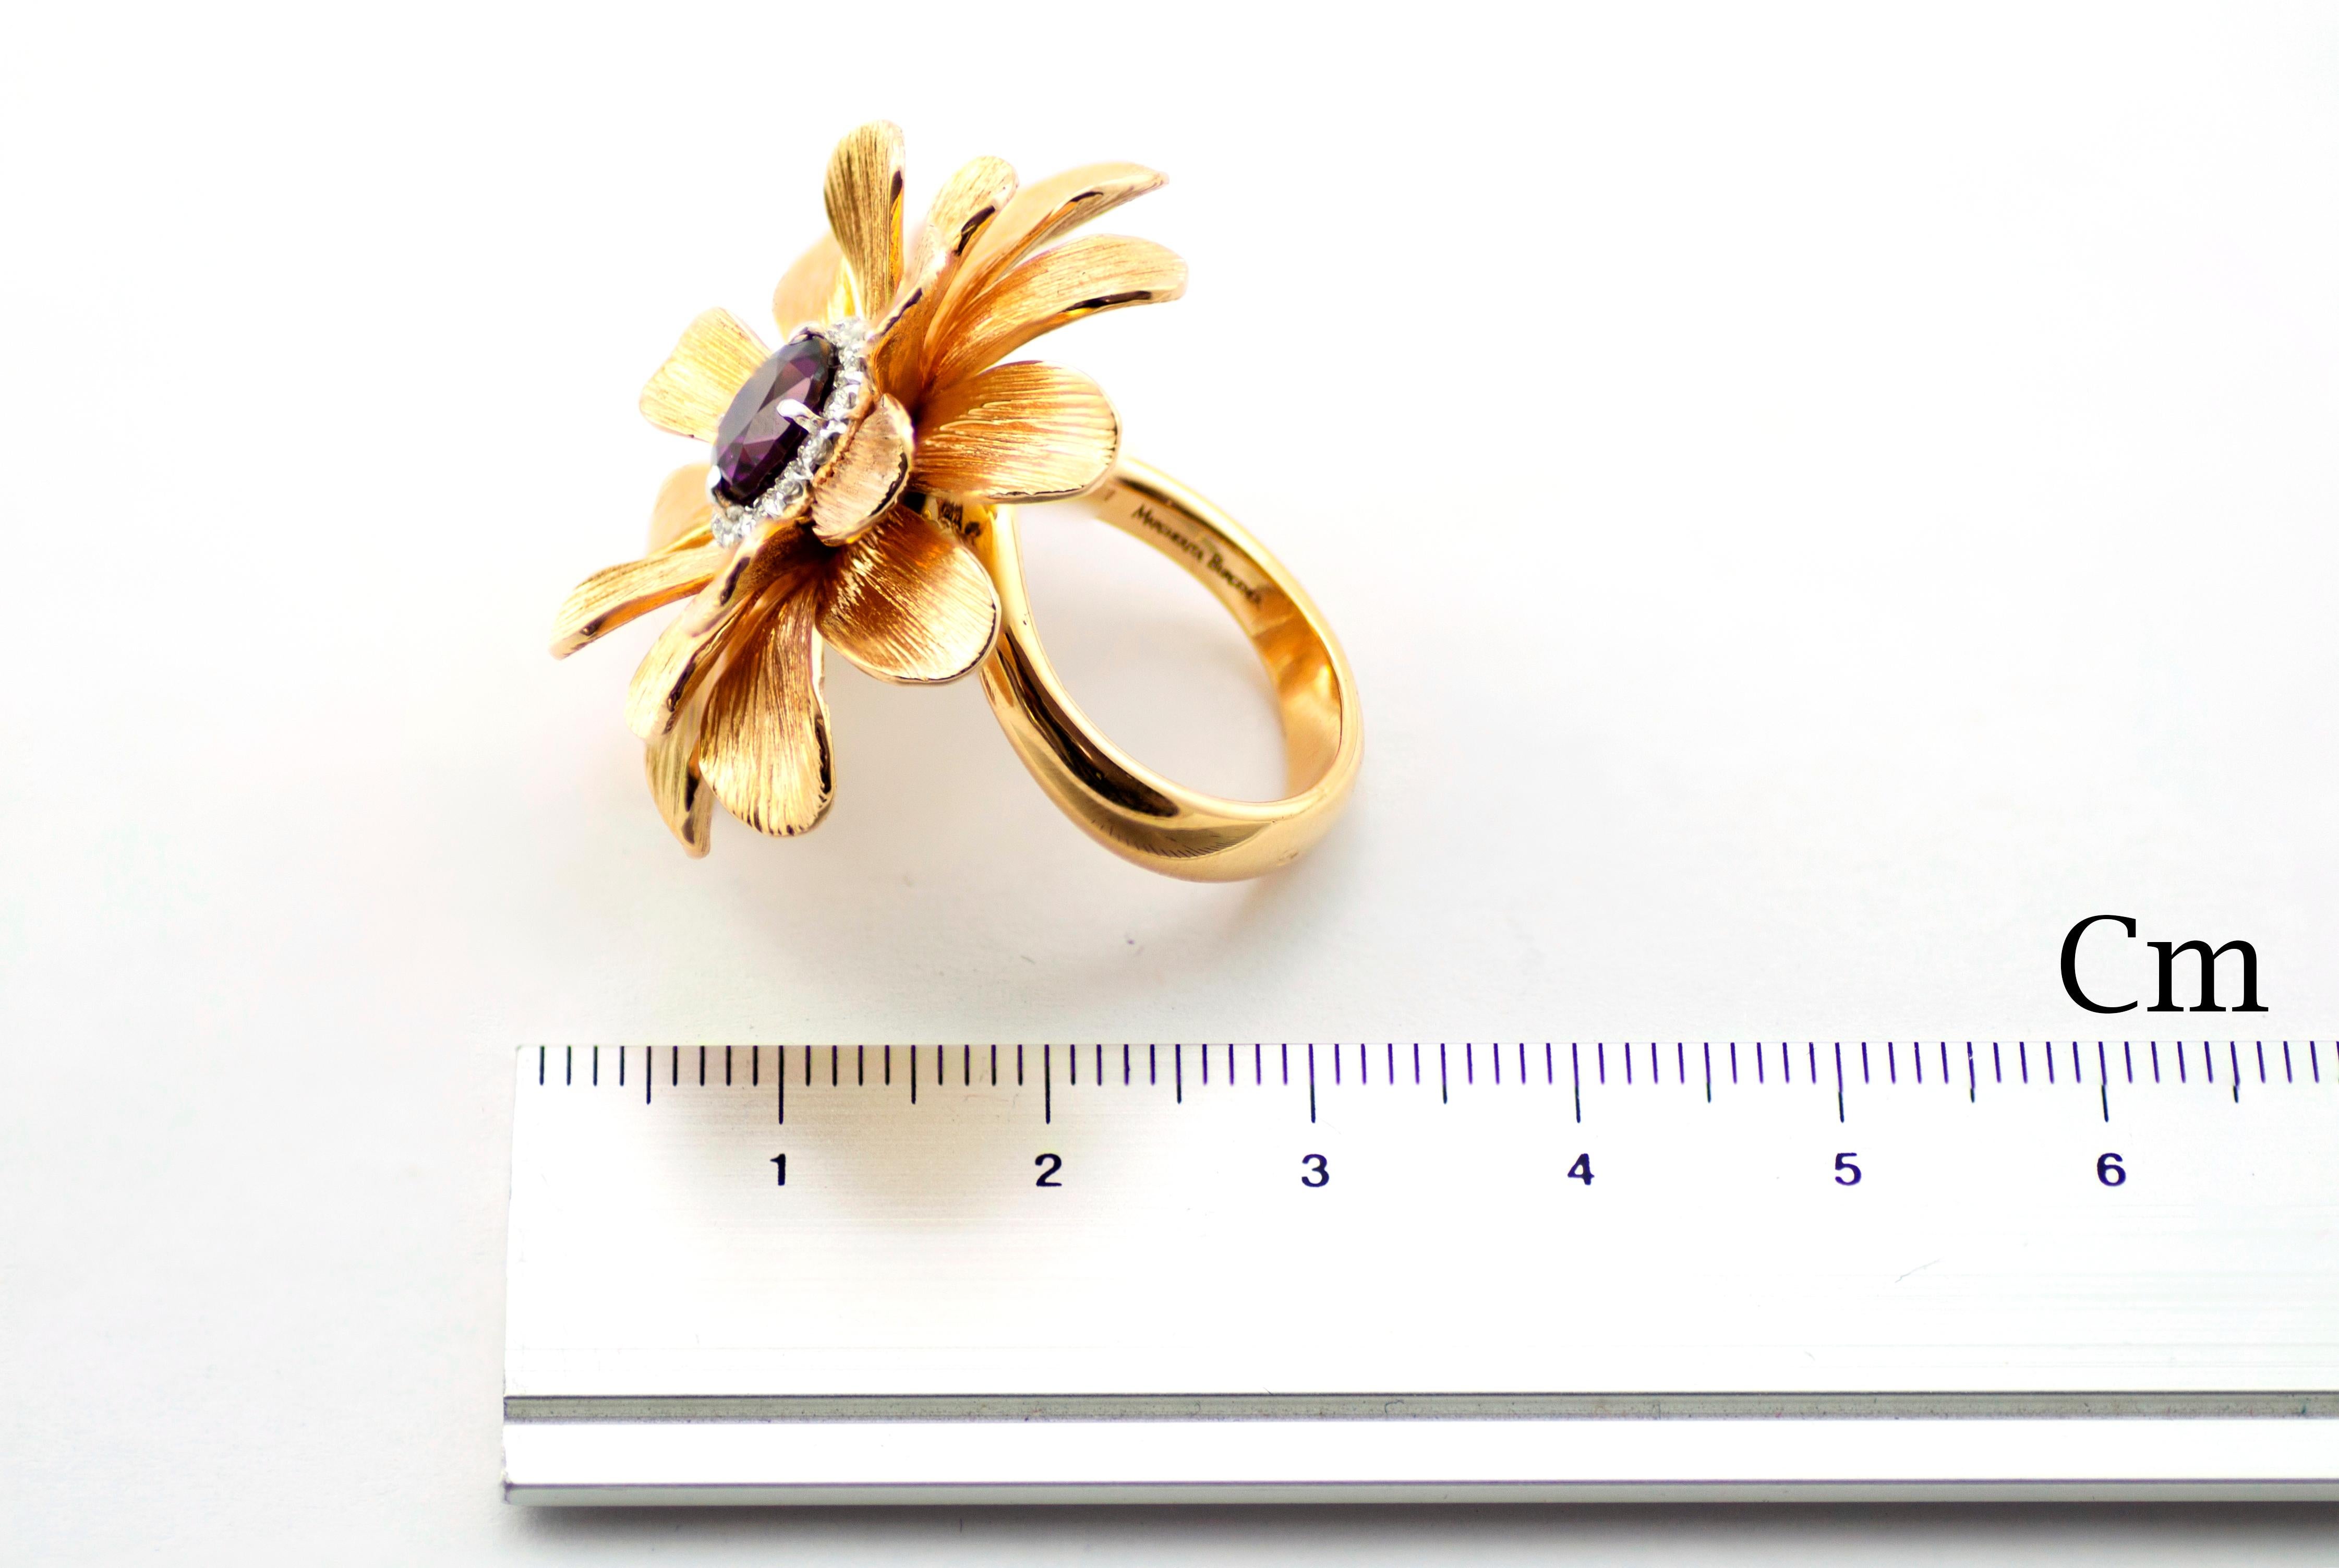 The Happy Flower ring had been handcrafted in Margherita Burgener family workshop, Italy.
Beautifully engraved by burin, each petal looks like real flower ones.
Pink gold matches perfectly the purple of the central stone, a special natural